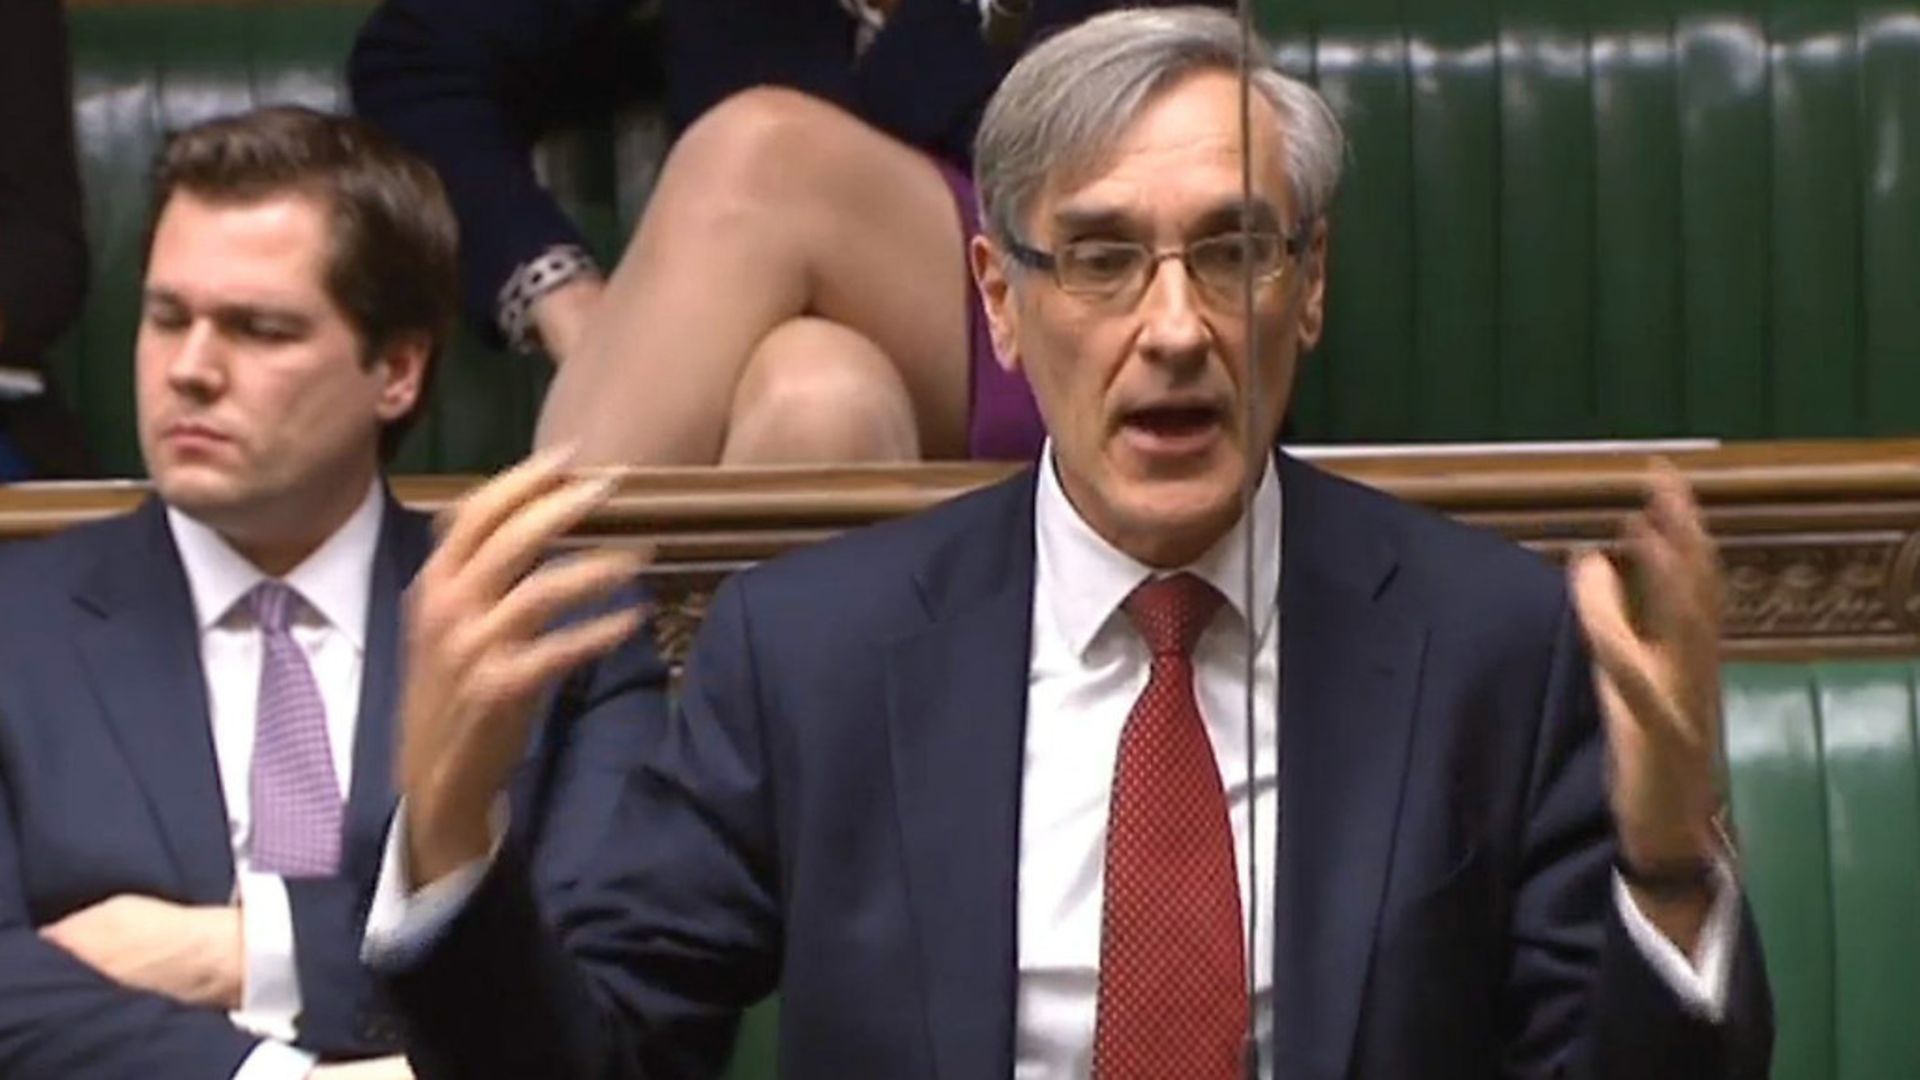 John Redwood speaks in the House of Commons. - Credit: PA Archive/PA Images